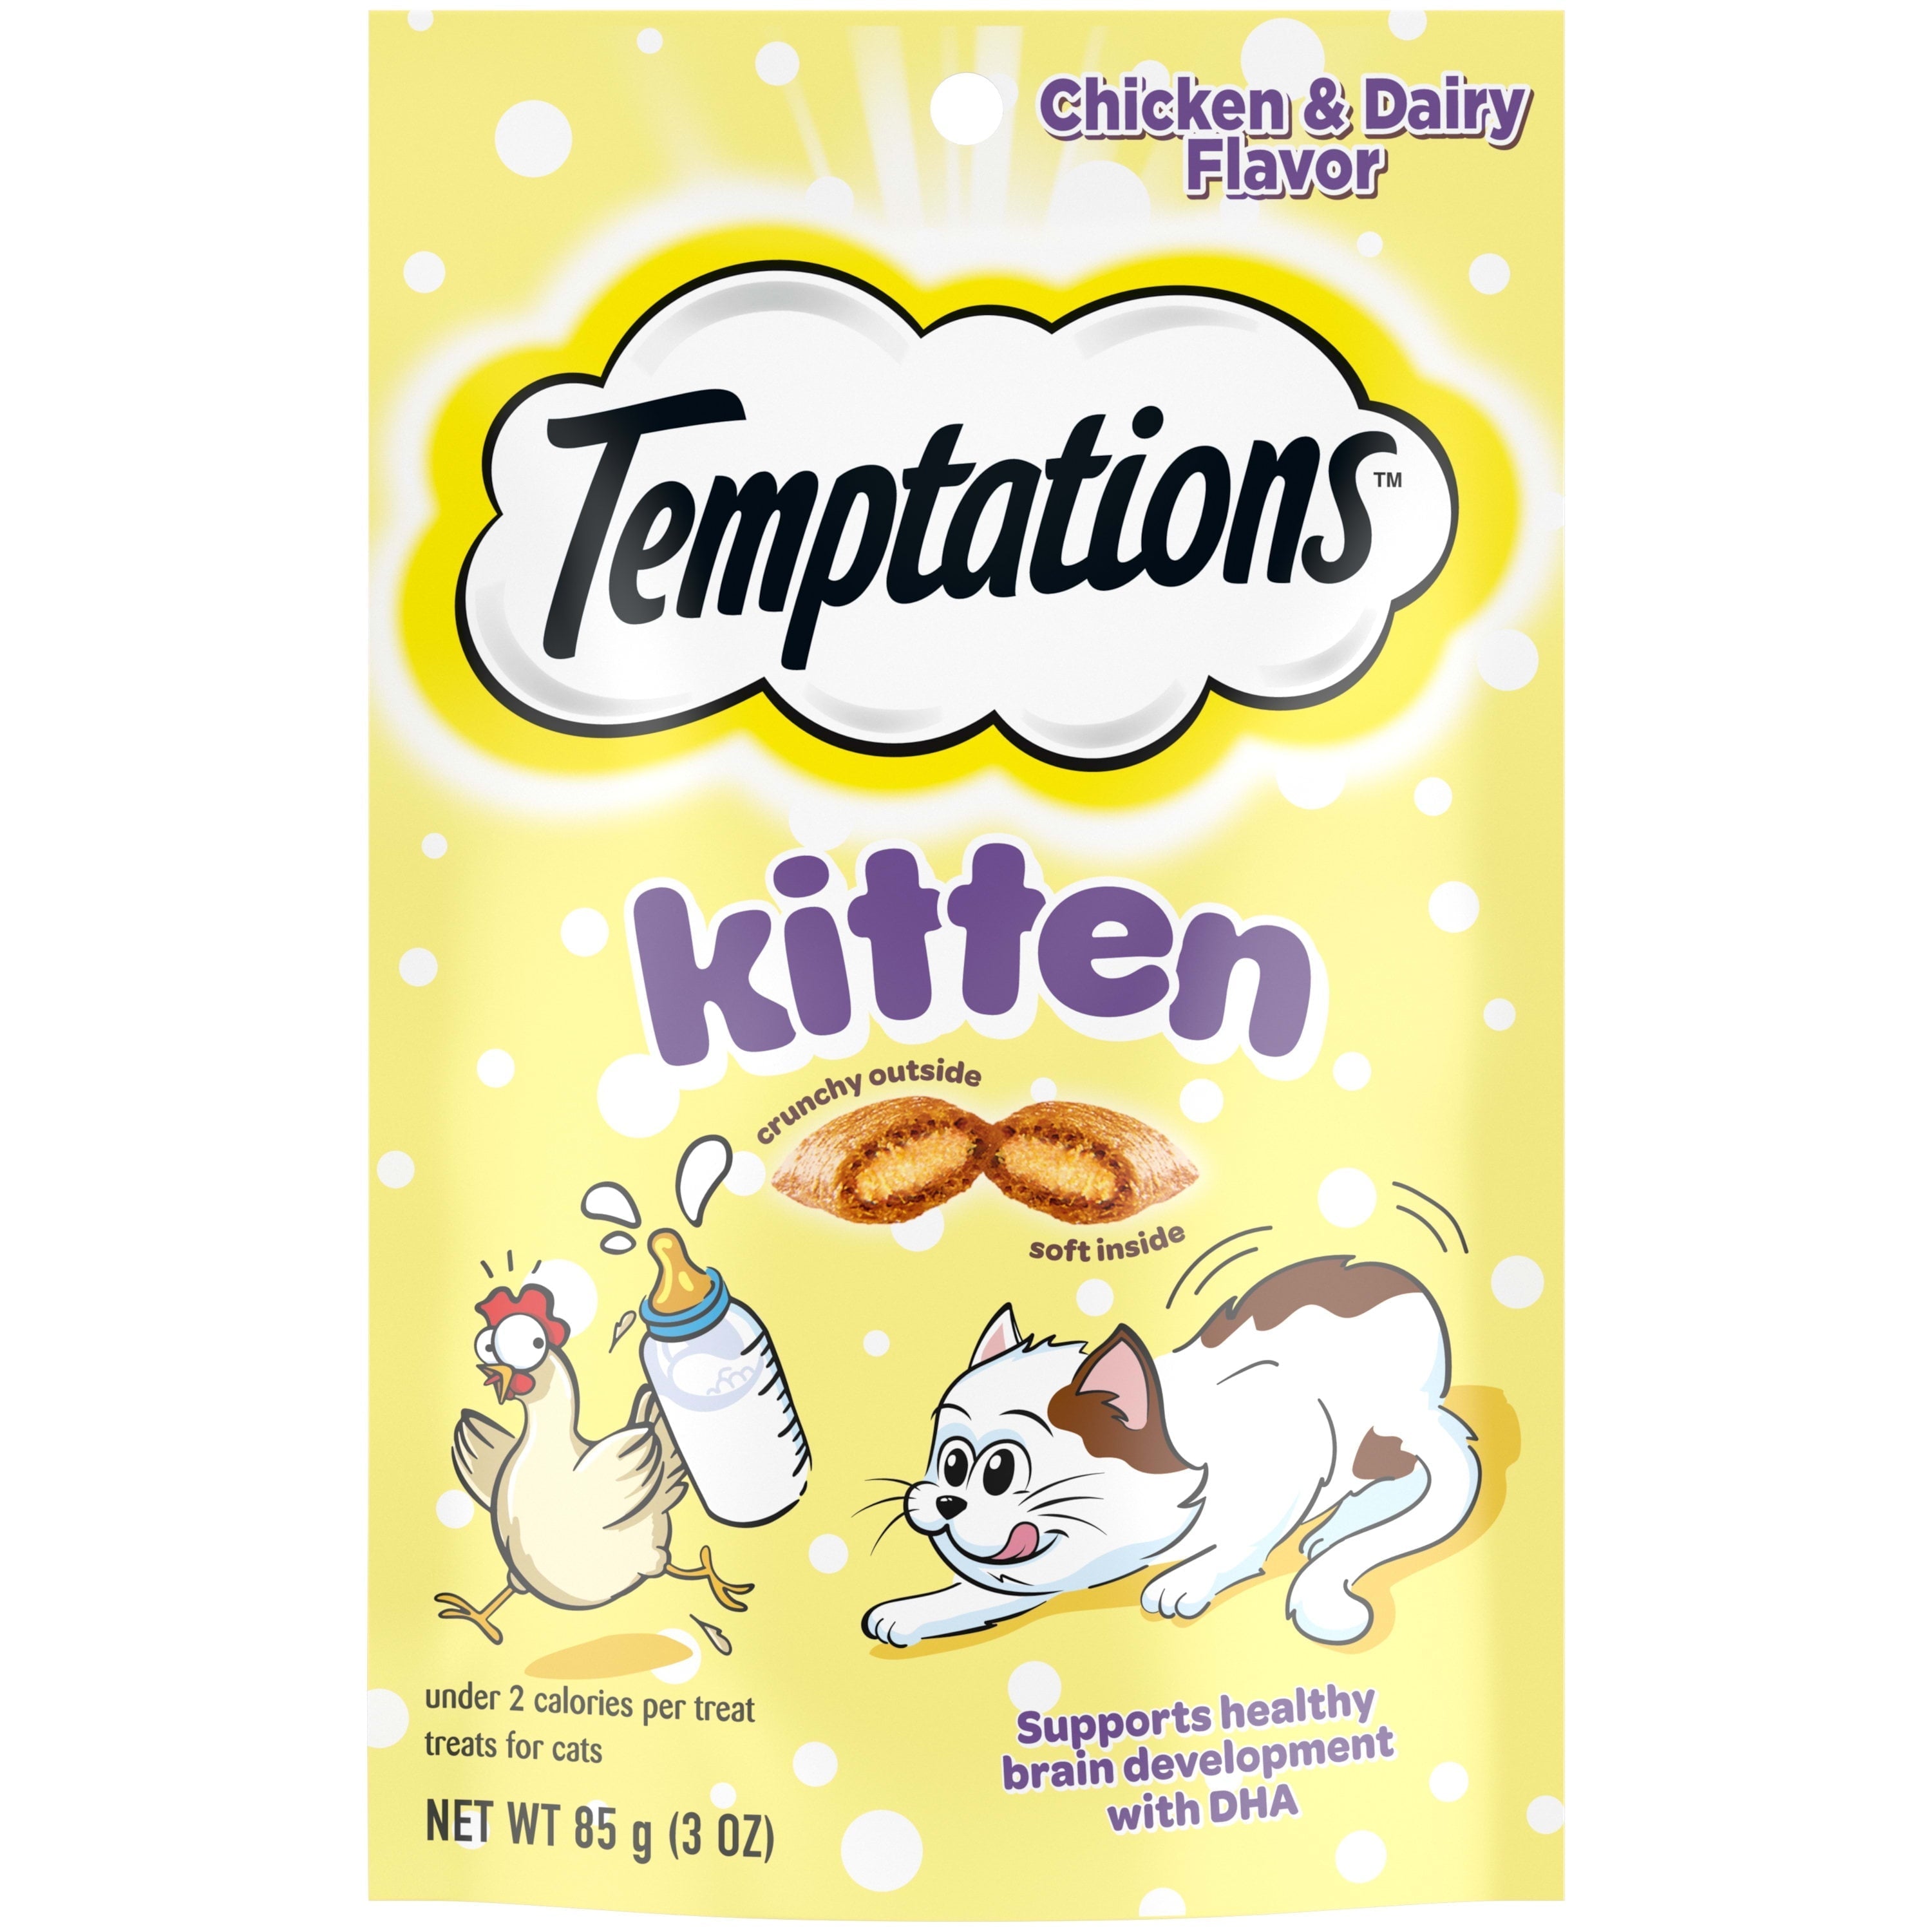 Wholesale prices with free shipping all over United States Temptations Chicken and Dairy Flavor Crunchy and Soft Kitten Treats, 3 oz. - Steven Deals